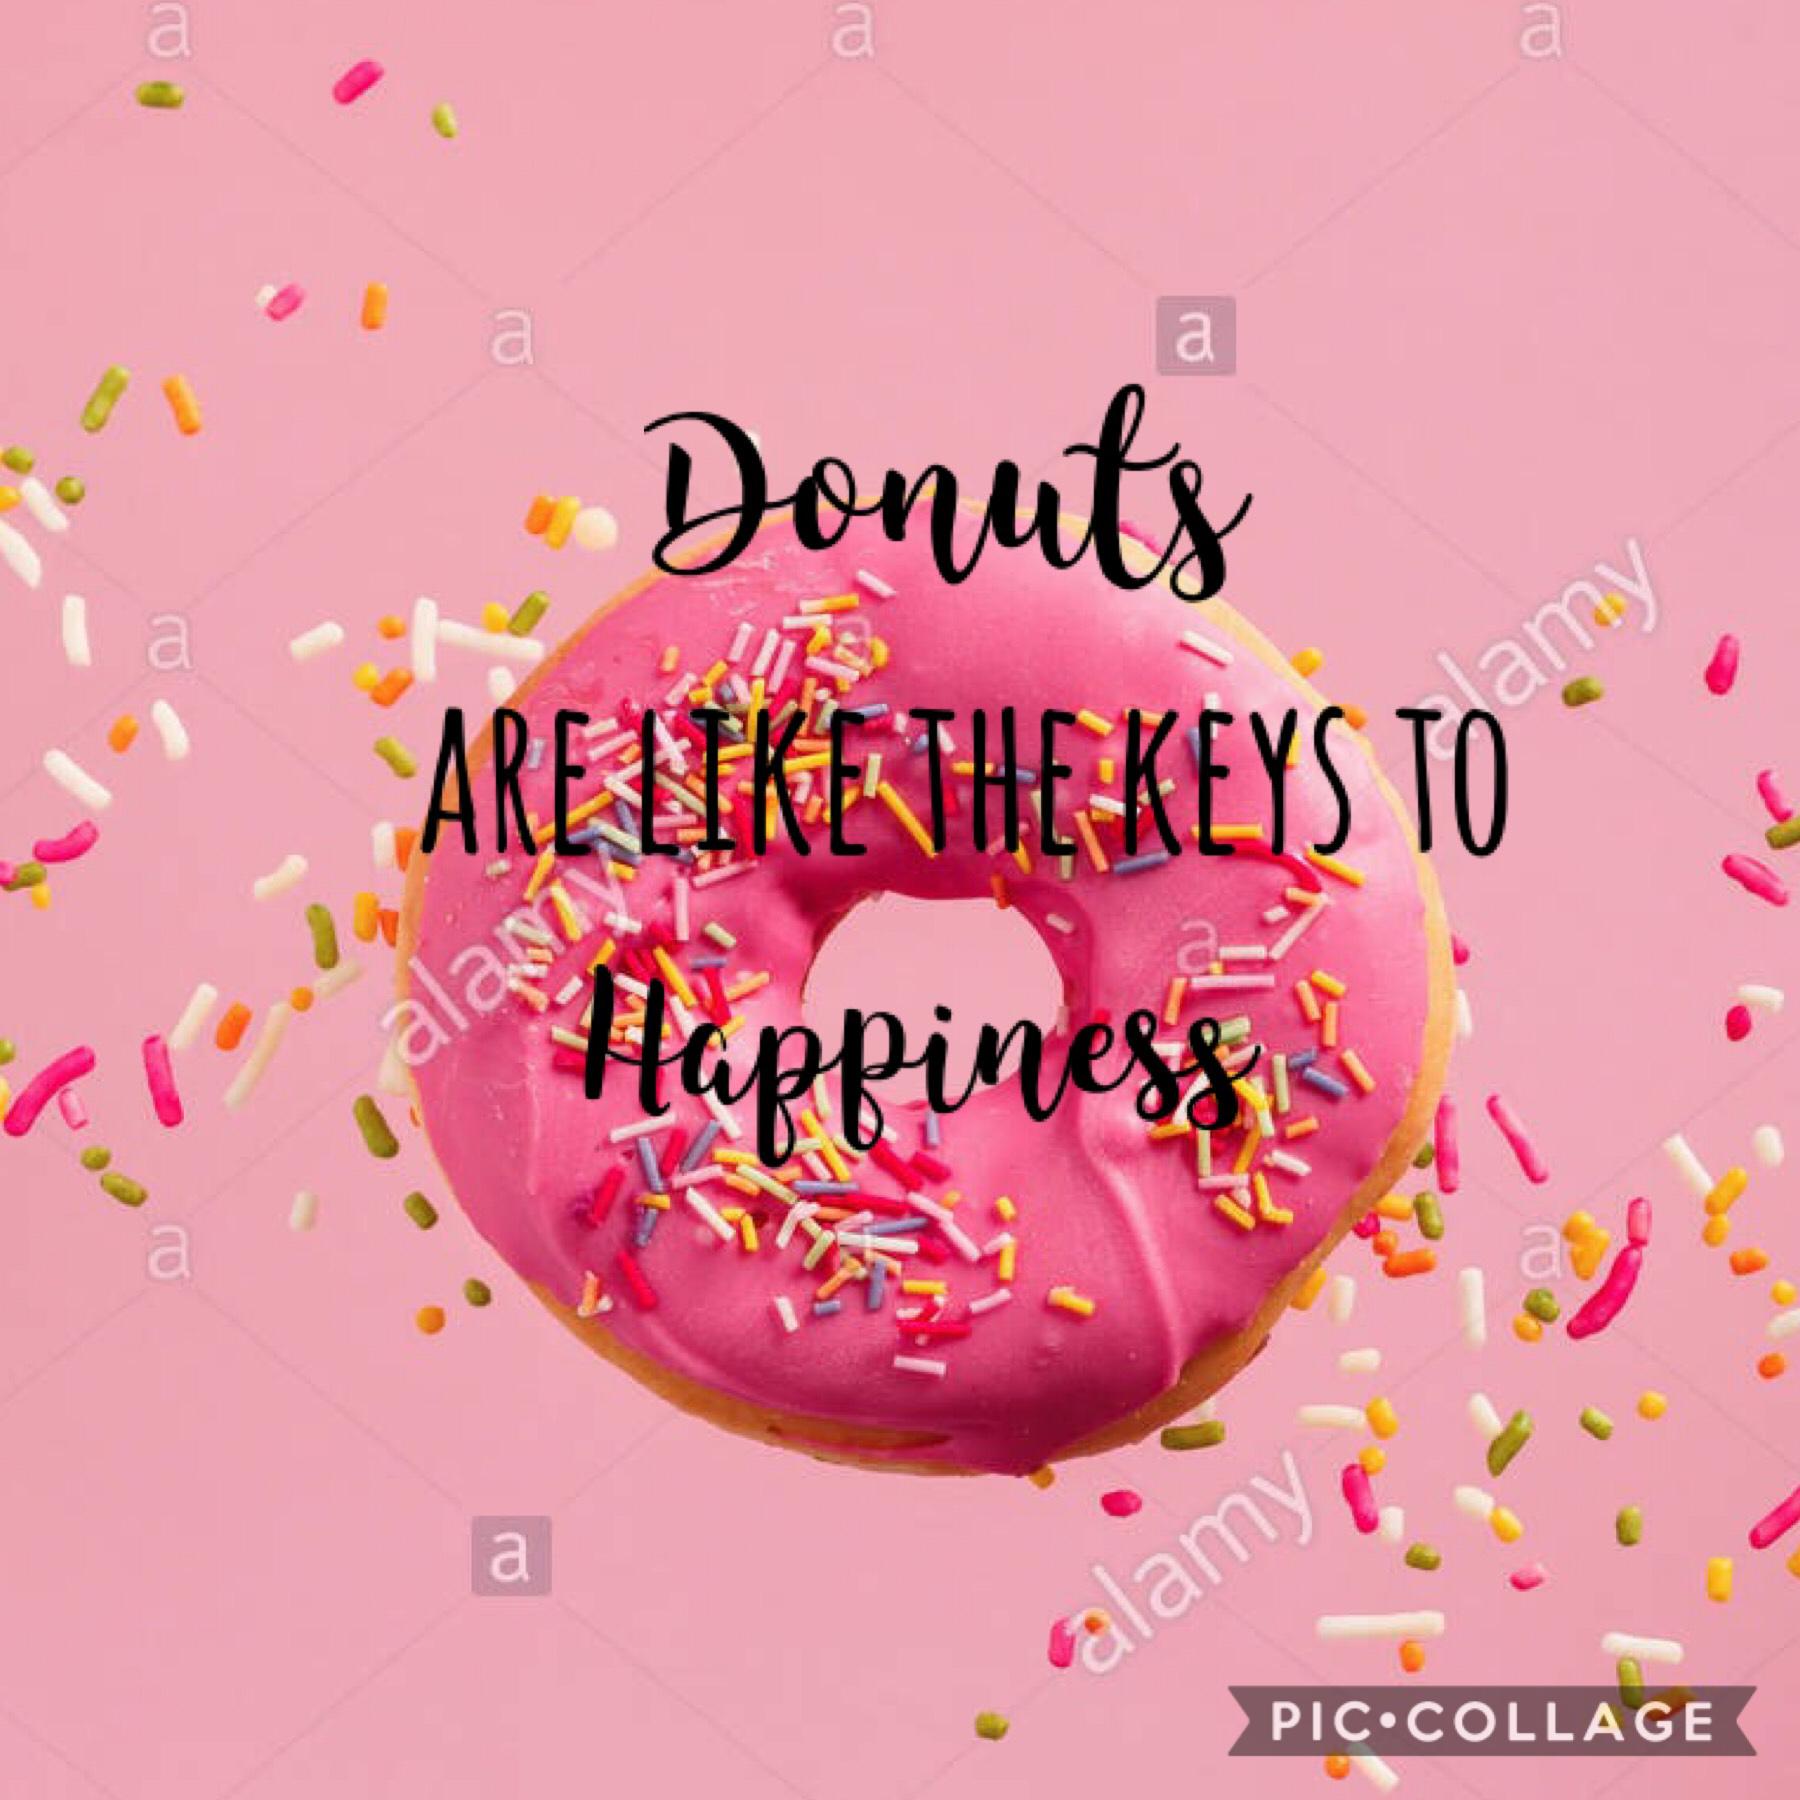 #we all love donuts 🍩 